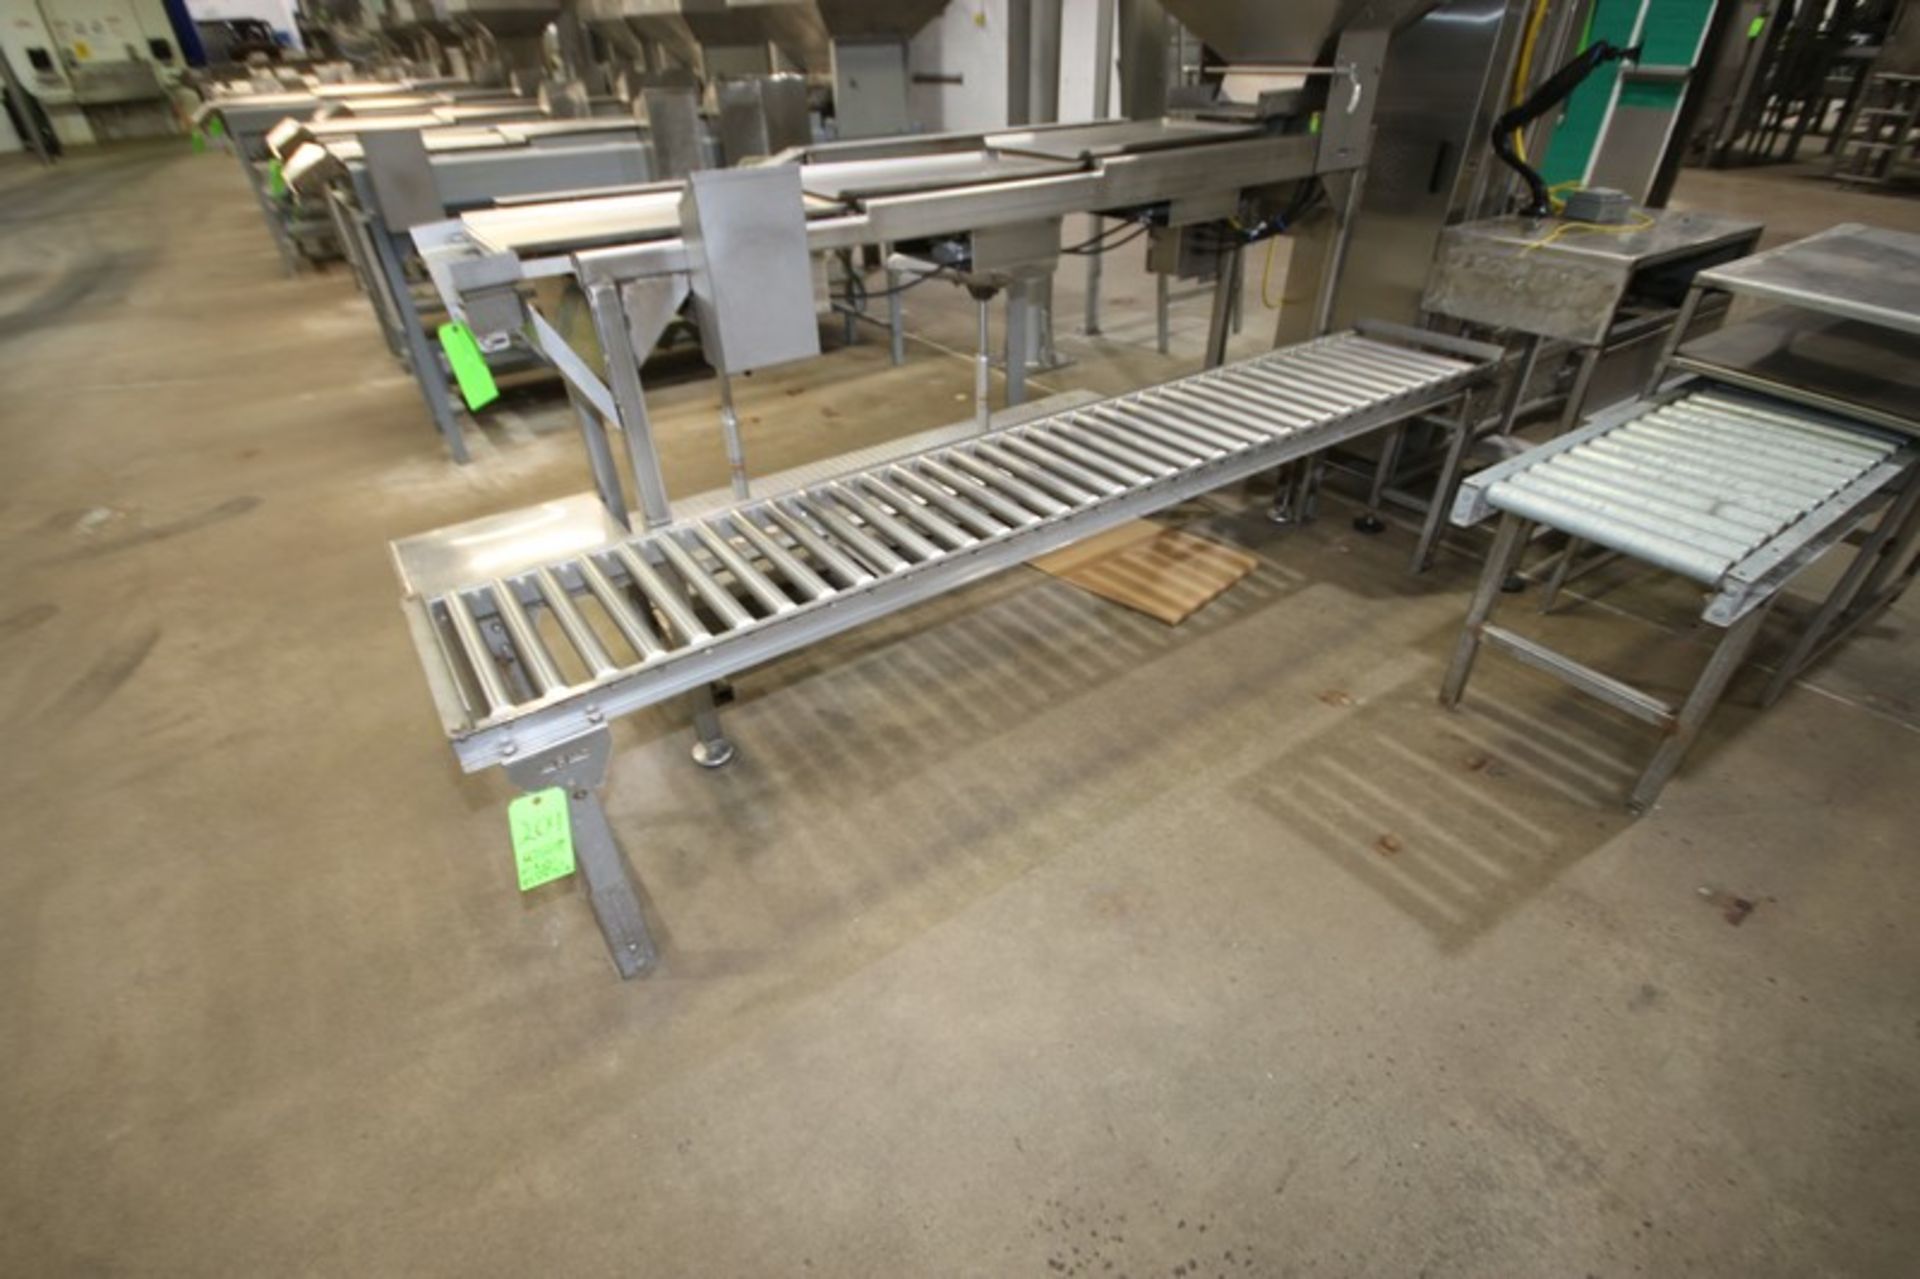 (2) Straight Sections of Roller Conveyor, (1) Aprox. 104" L x 15-1/2" W, & (1) 68" L x 15-1/2" W